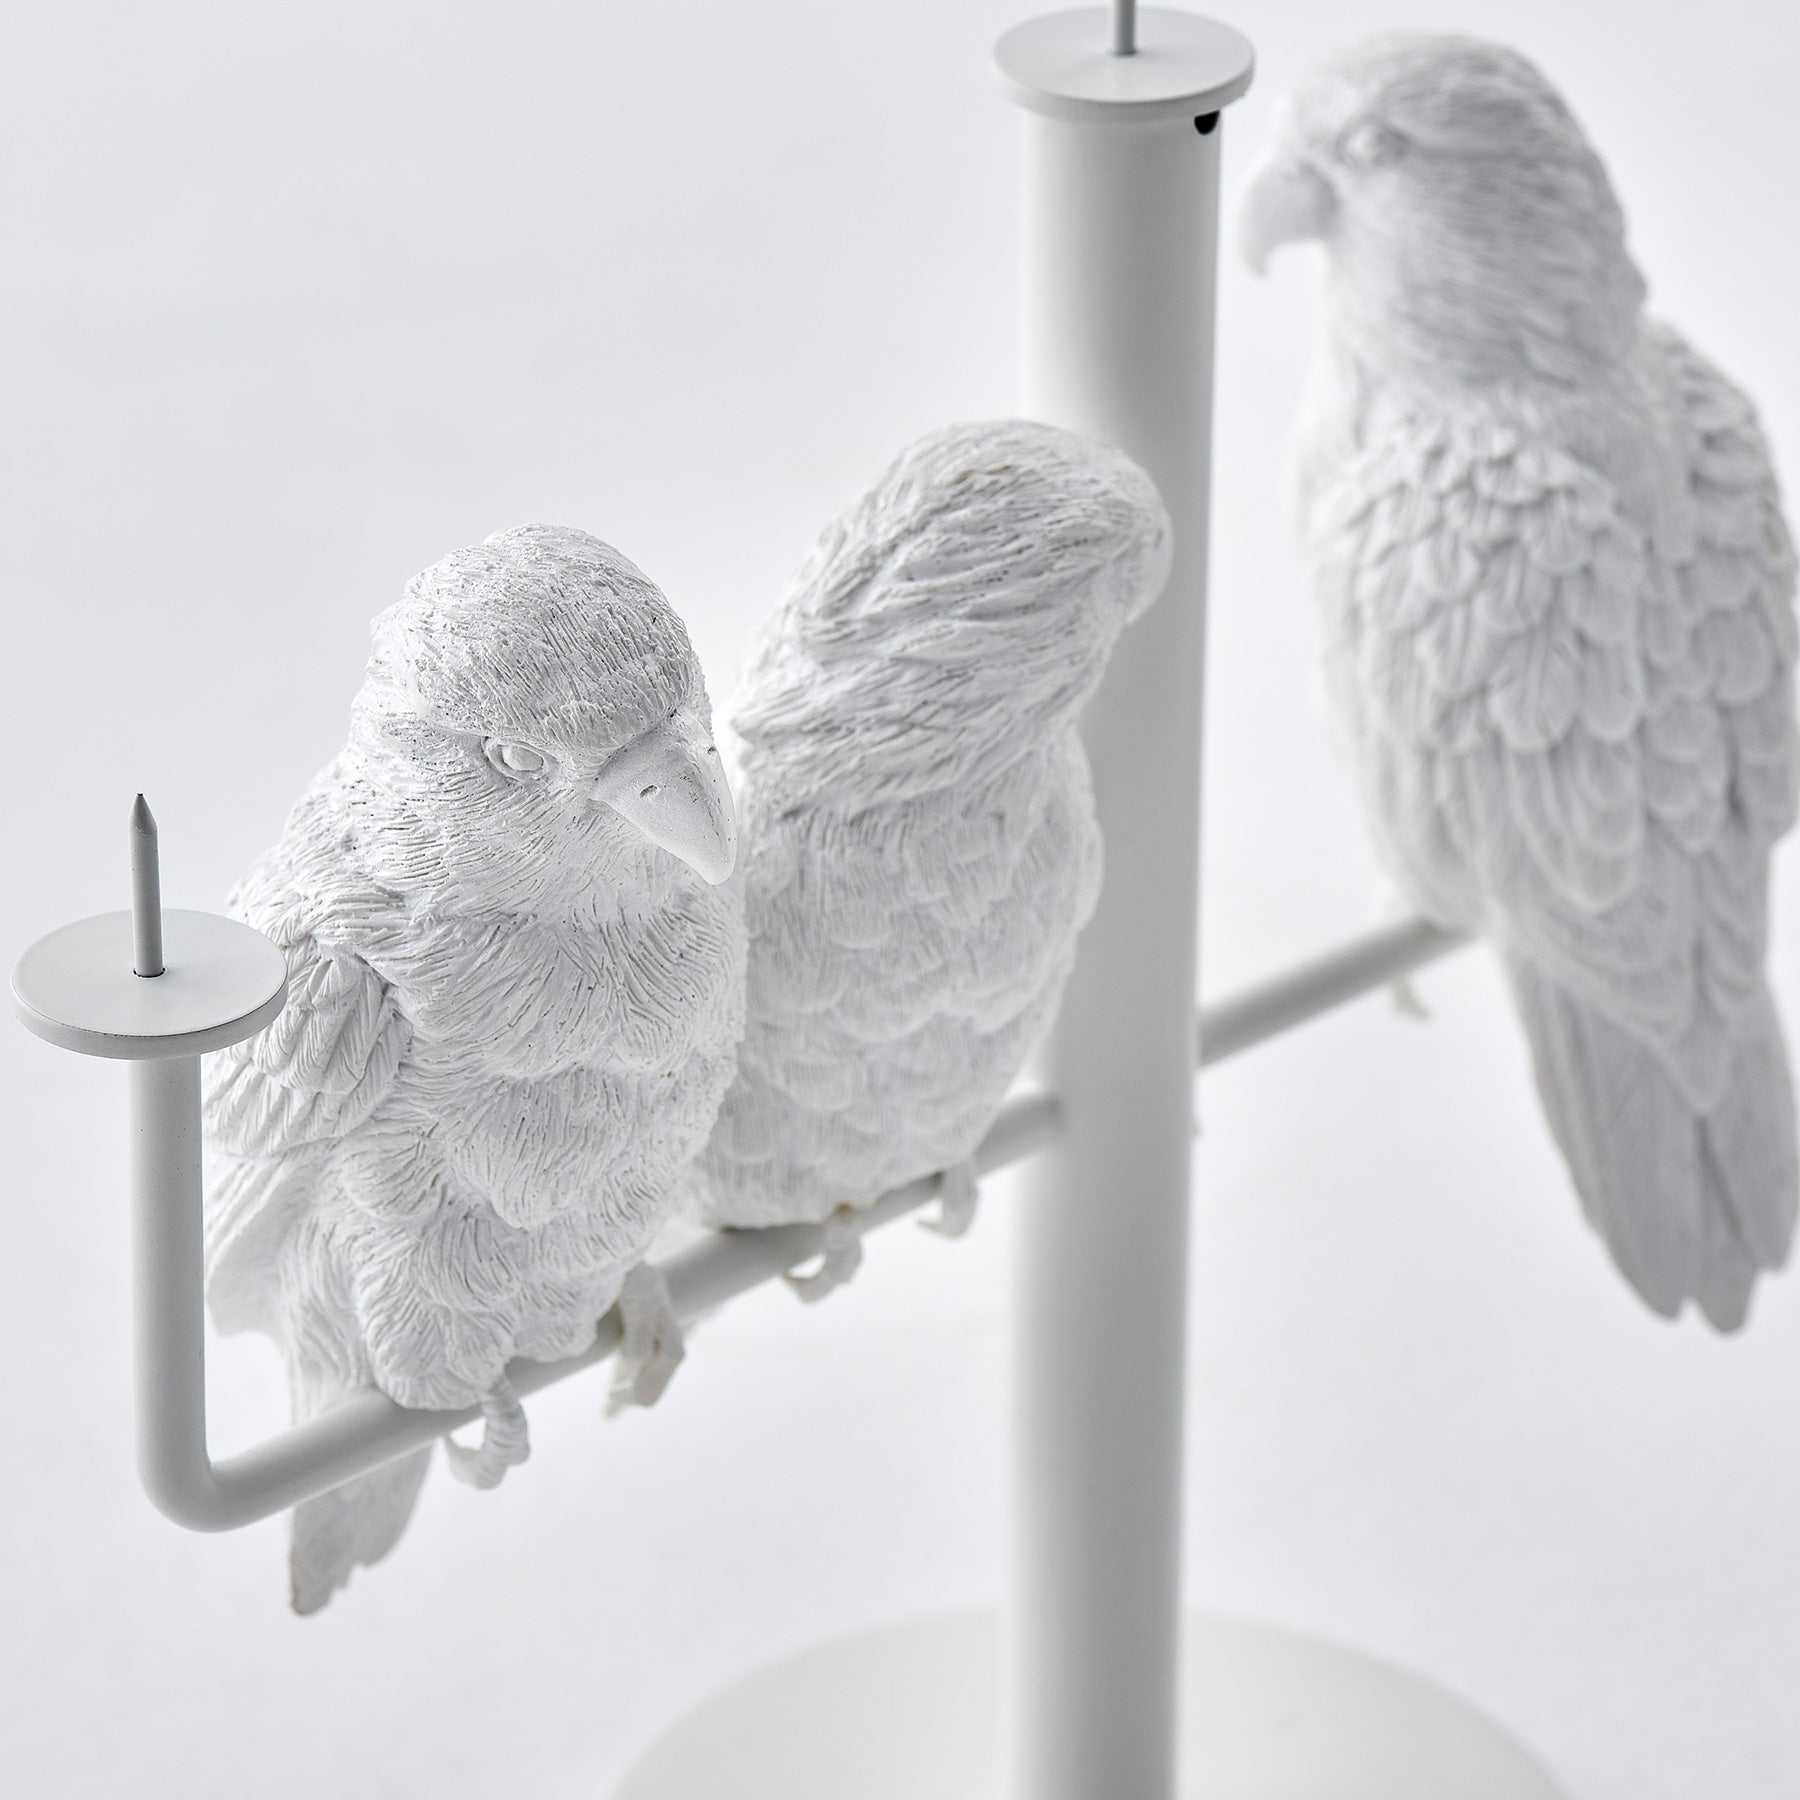 Three parrots create ambiance and good mood as candleholders